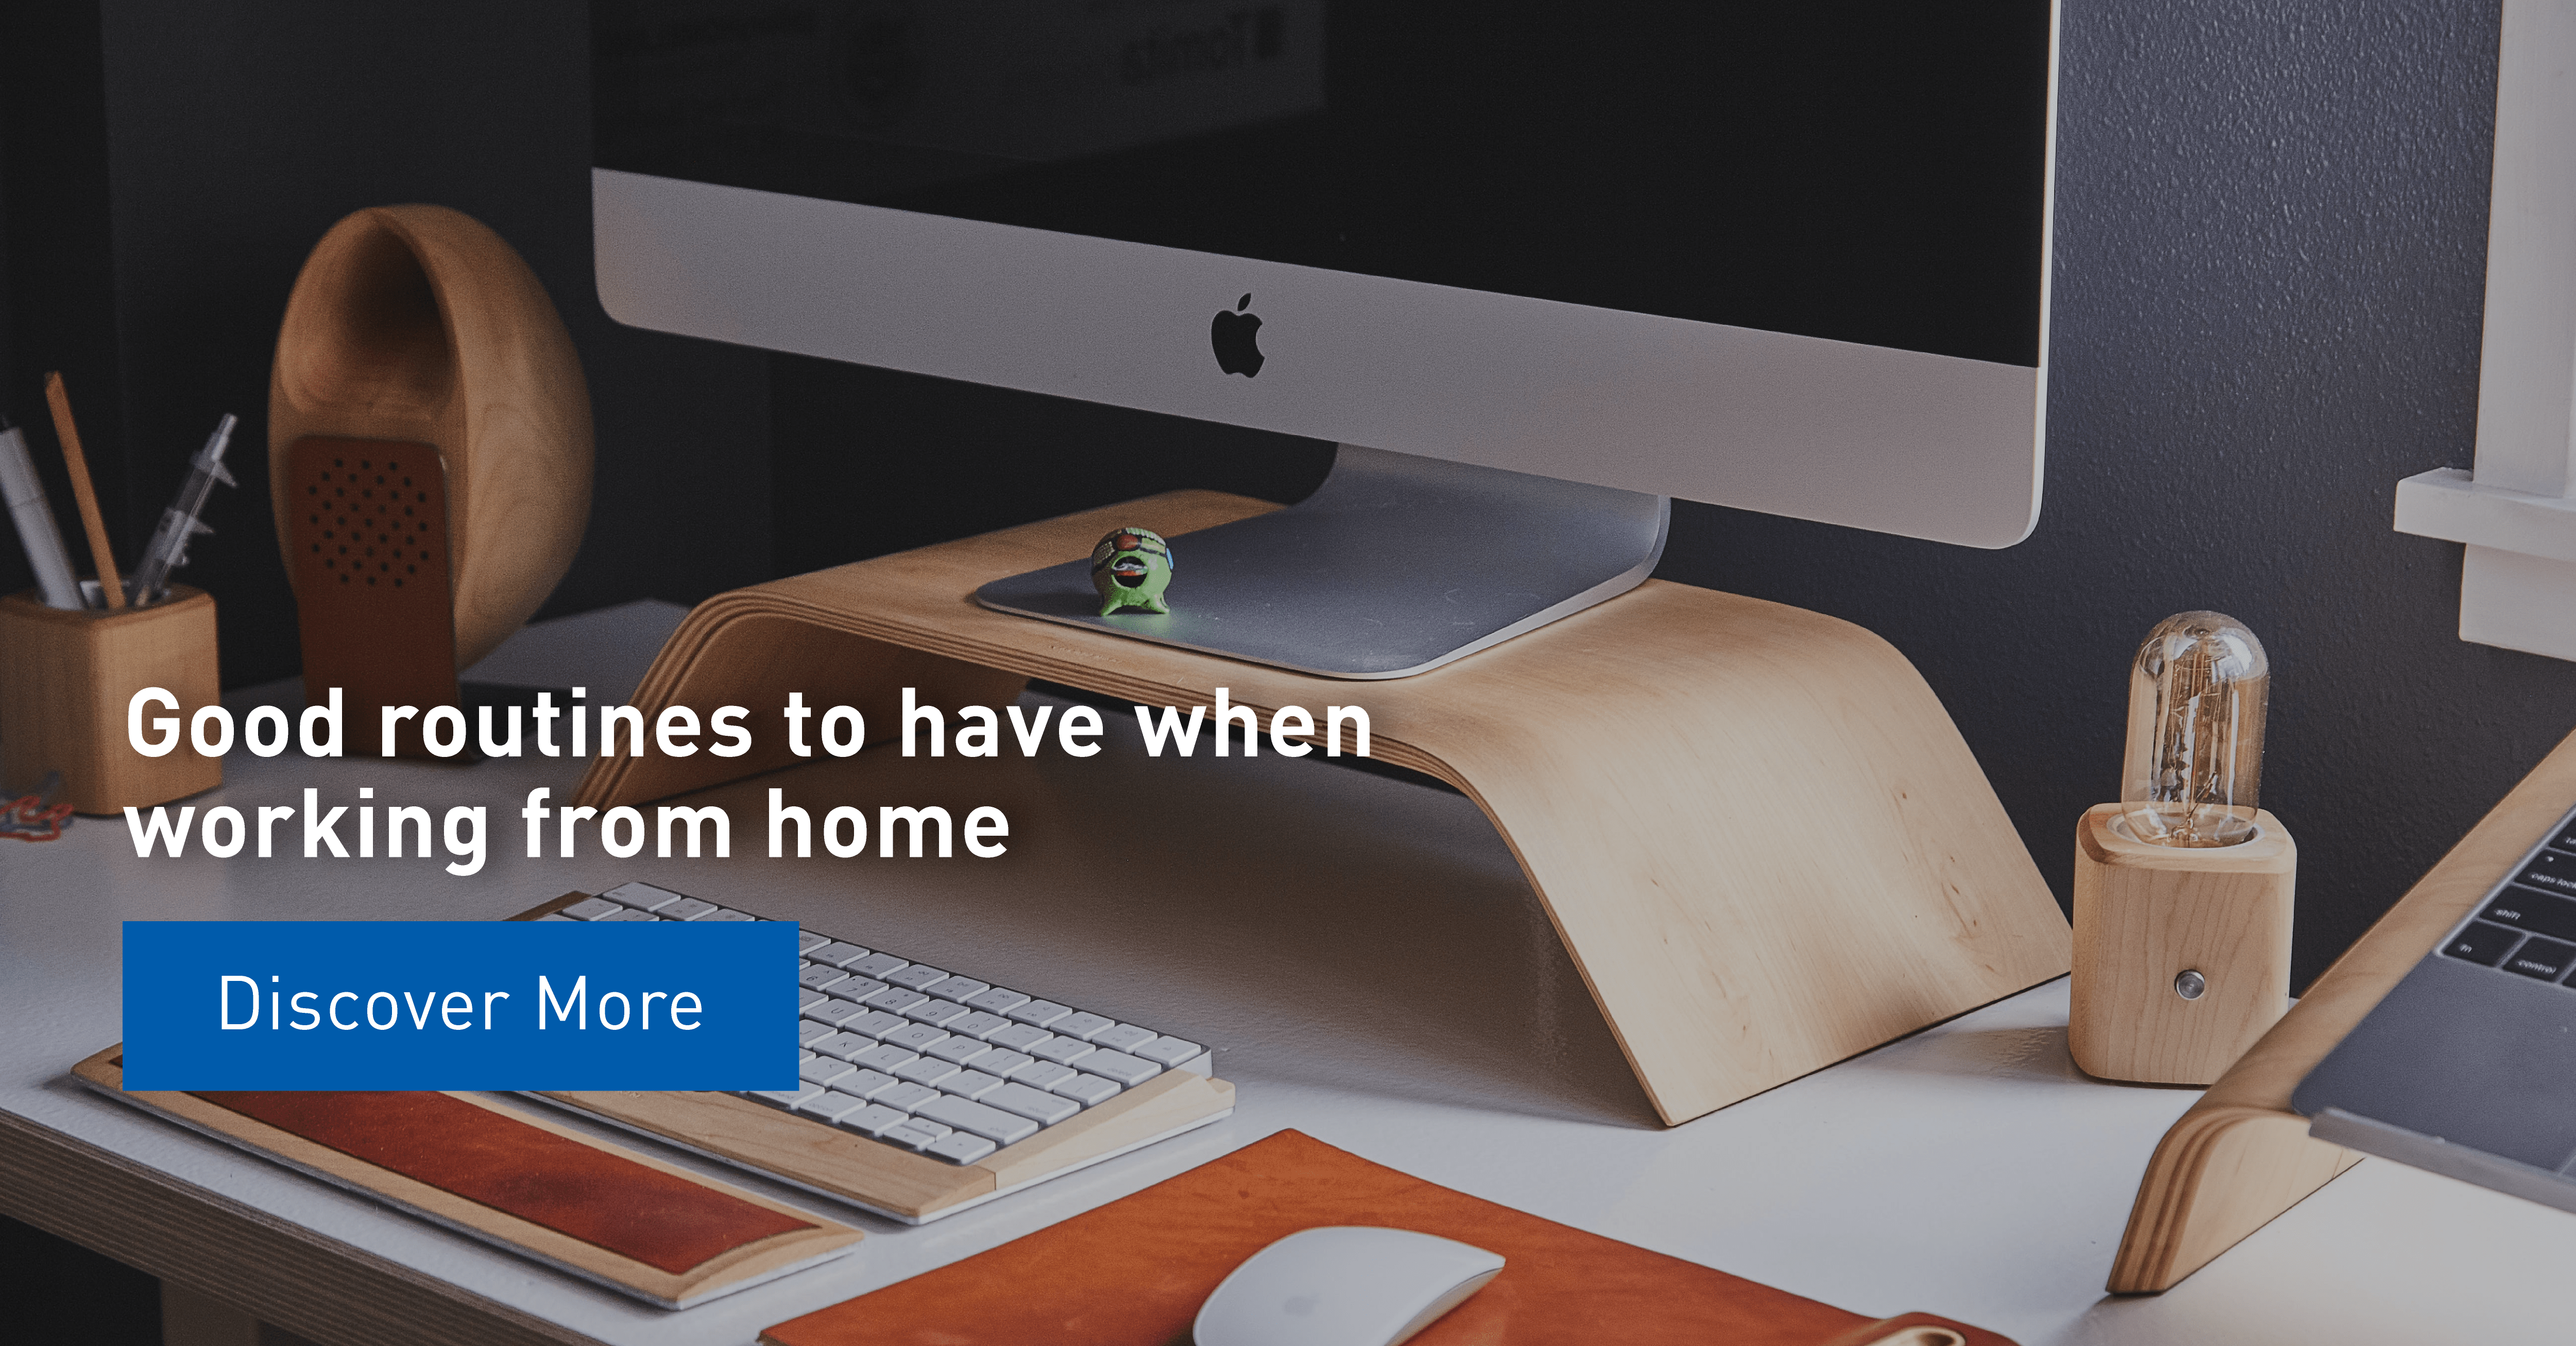 Good routines to have when working from home